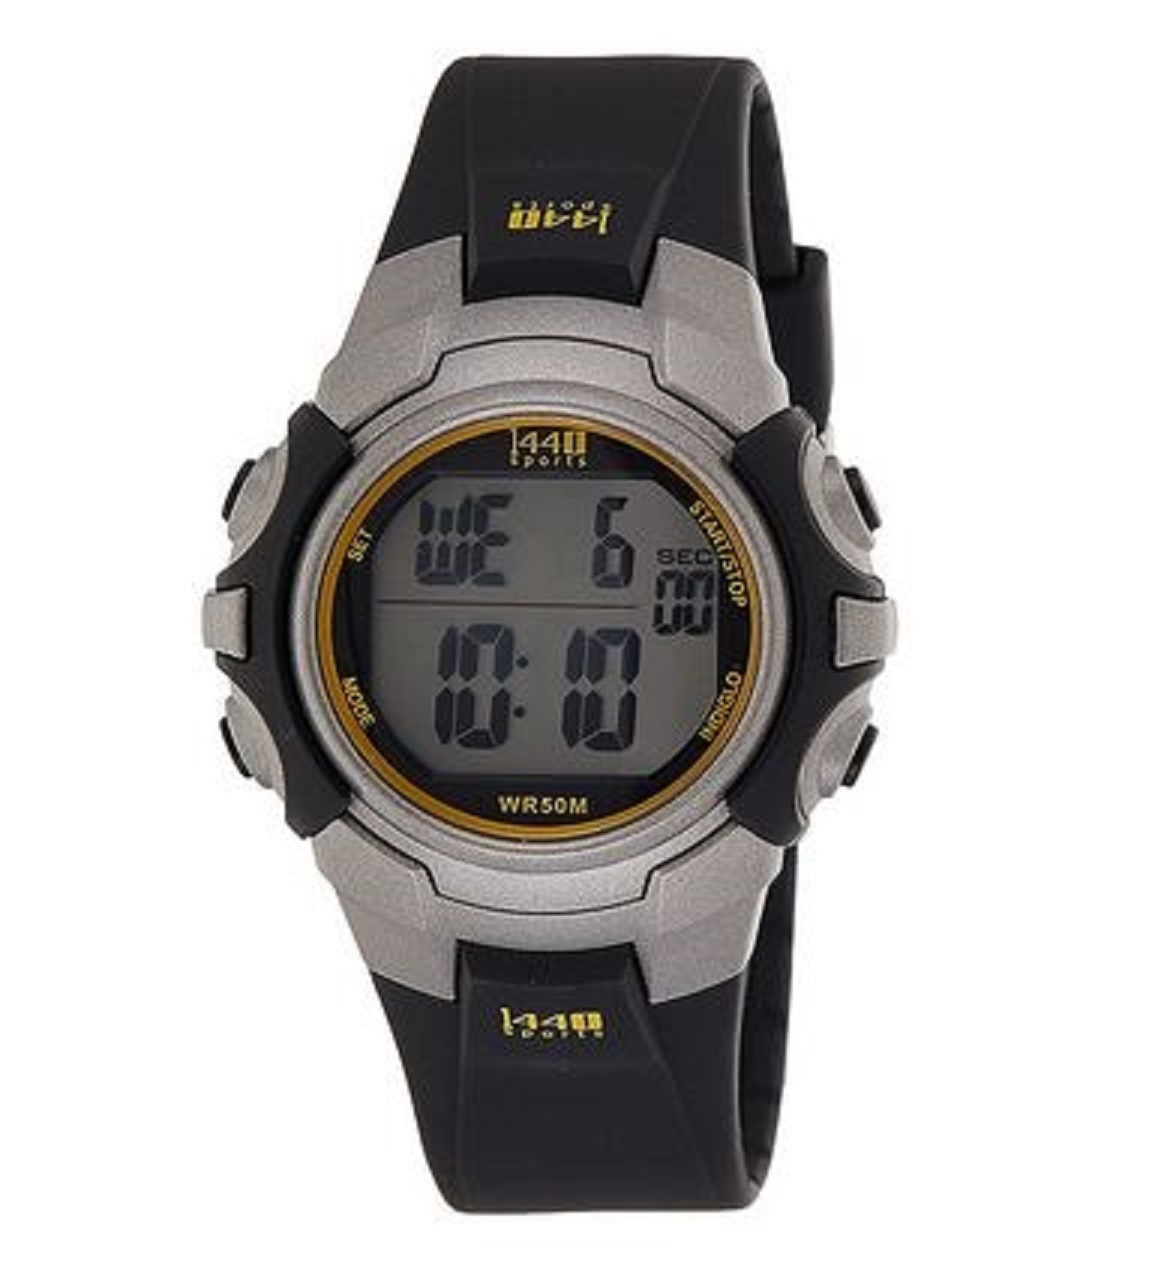 Timex 1440 SPORT Watch Instructions & Manuals - Feature Image